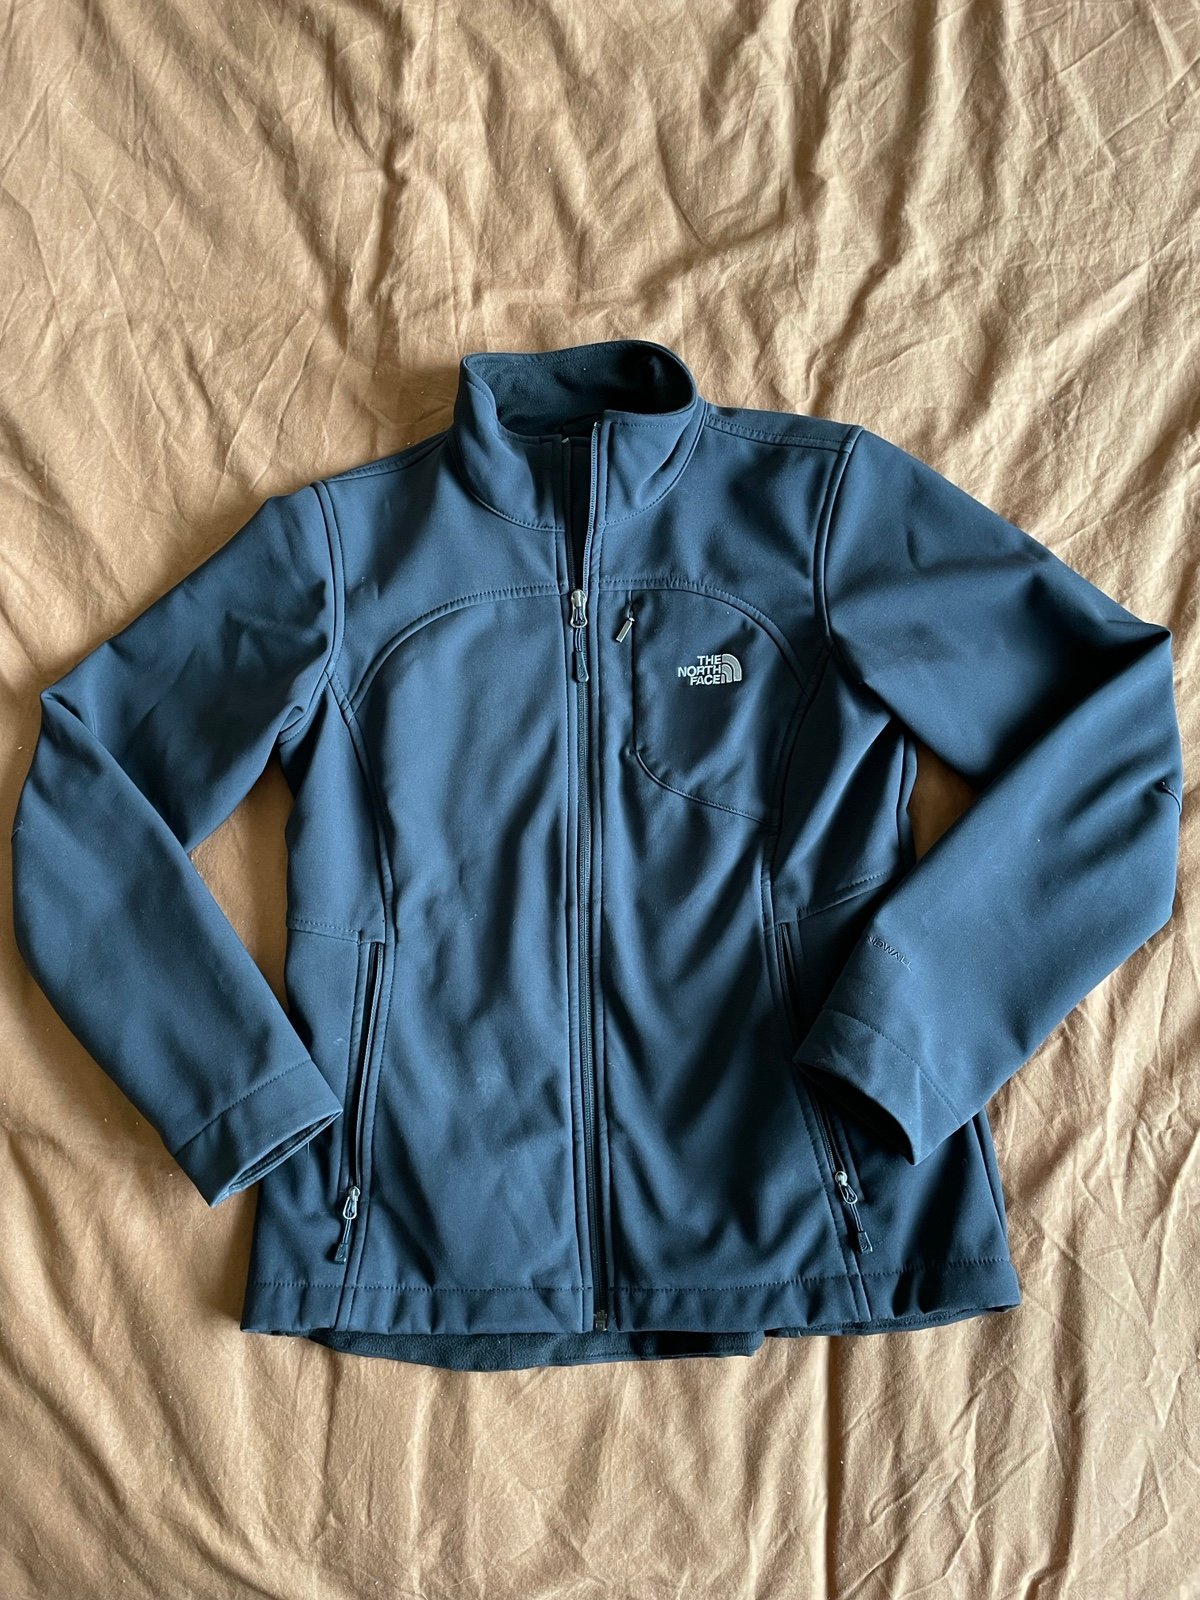 the Lowest price The North Face coat NdG3cHg0a just buy it